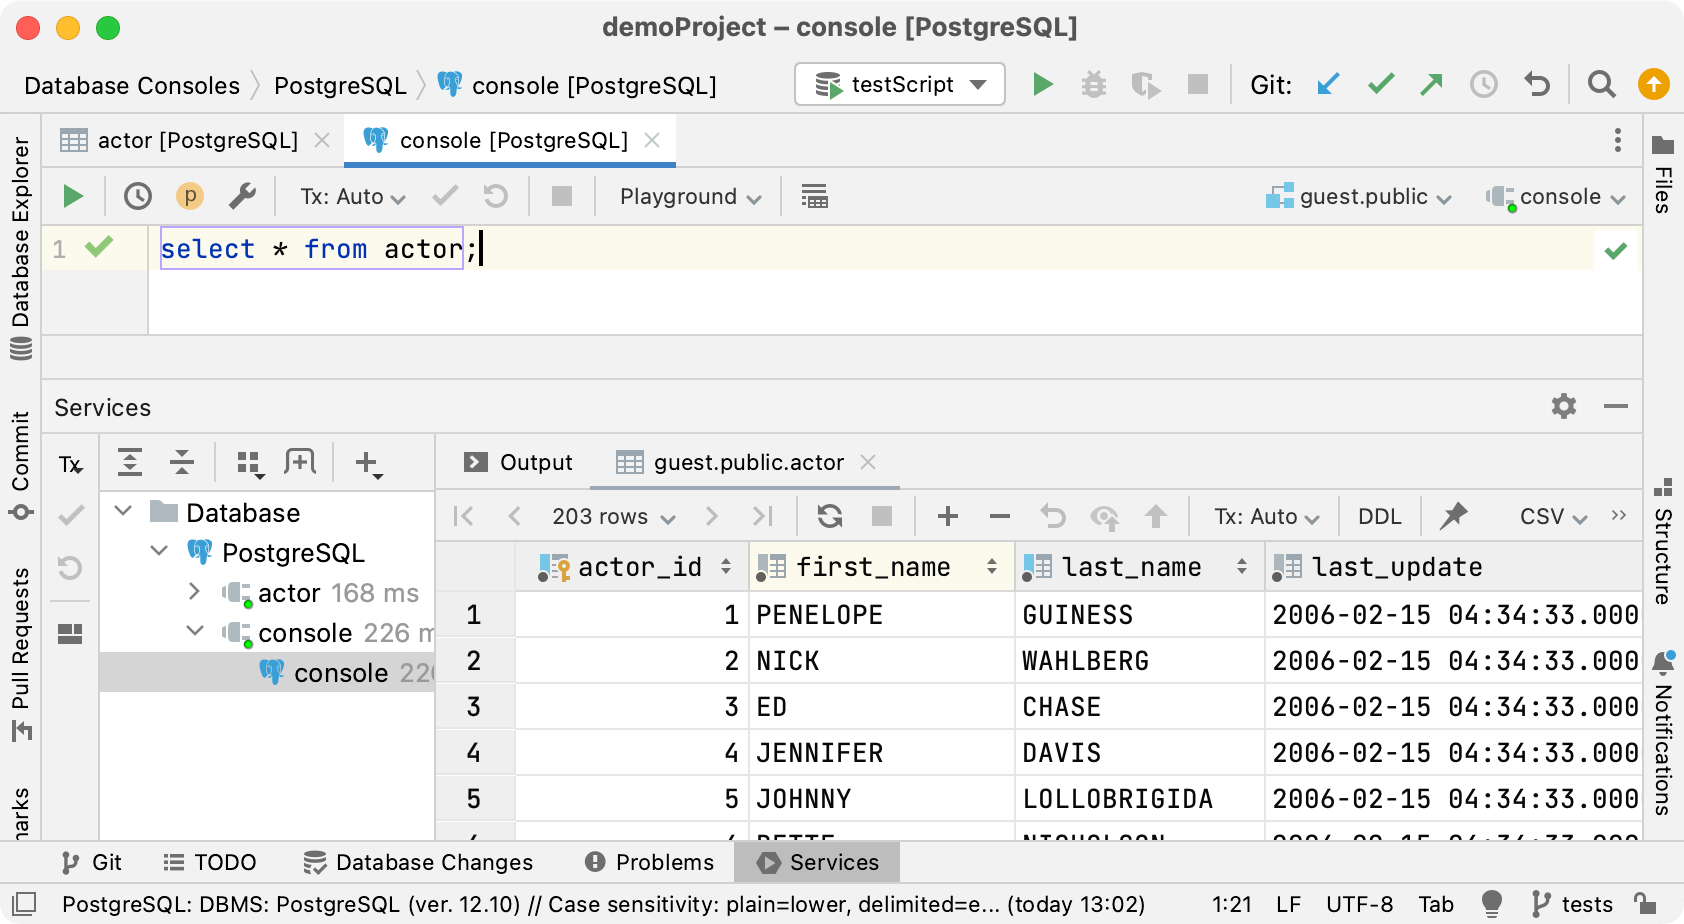 Data editor in a Result tab